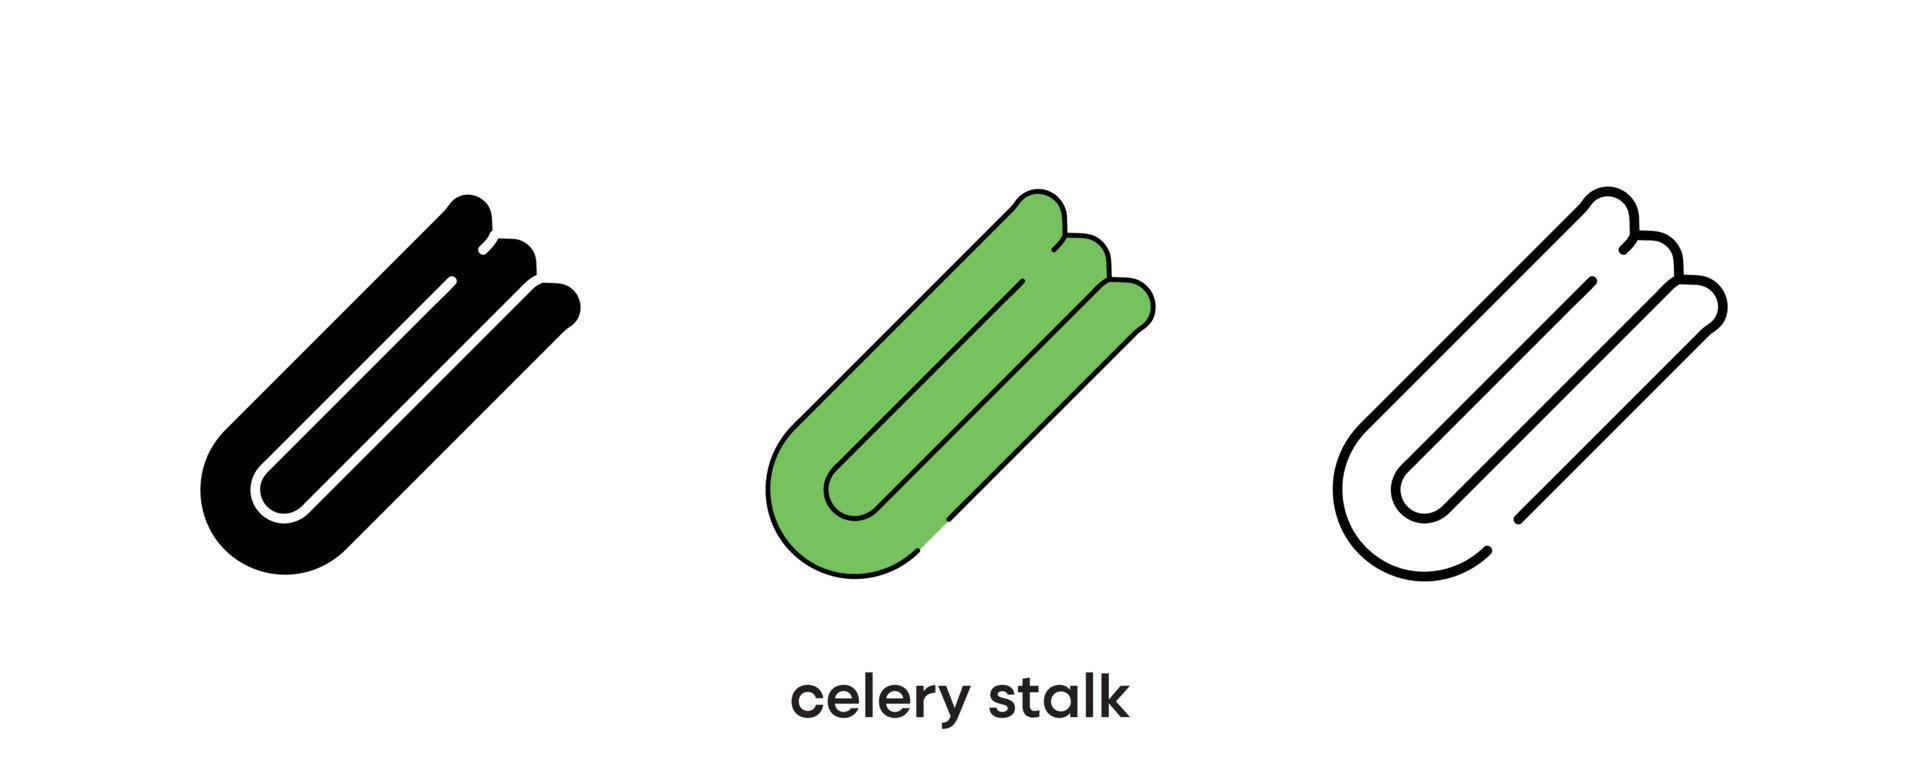 Celery stalk icon design. Set of silhouette, colorful and linear celery stalk icon. Food icon line vector illustration isolated on a clean background for your web mobile application logo design.